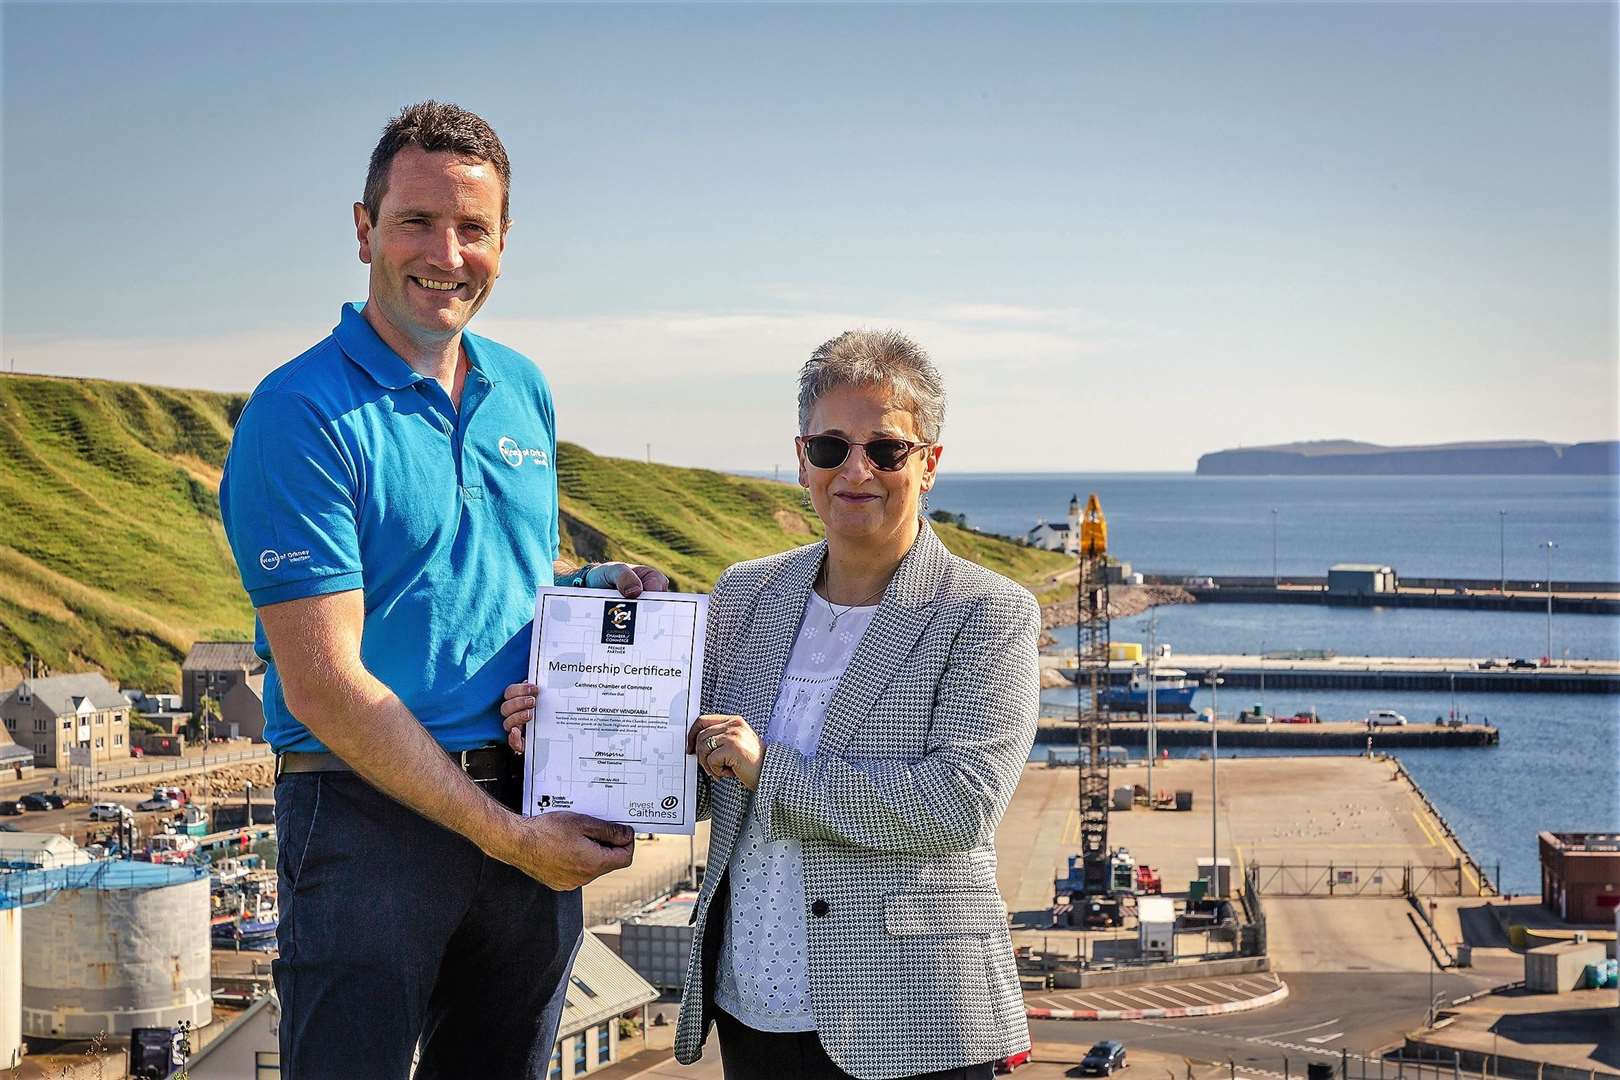 Jack Farnham of West of Orkney Windfarm – a Diamond Premier Partner – with Trudy Morris at Scrabster Harbour.